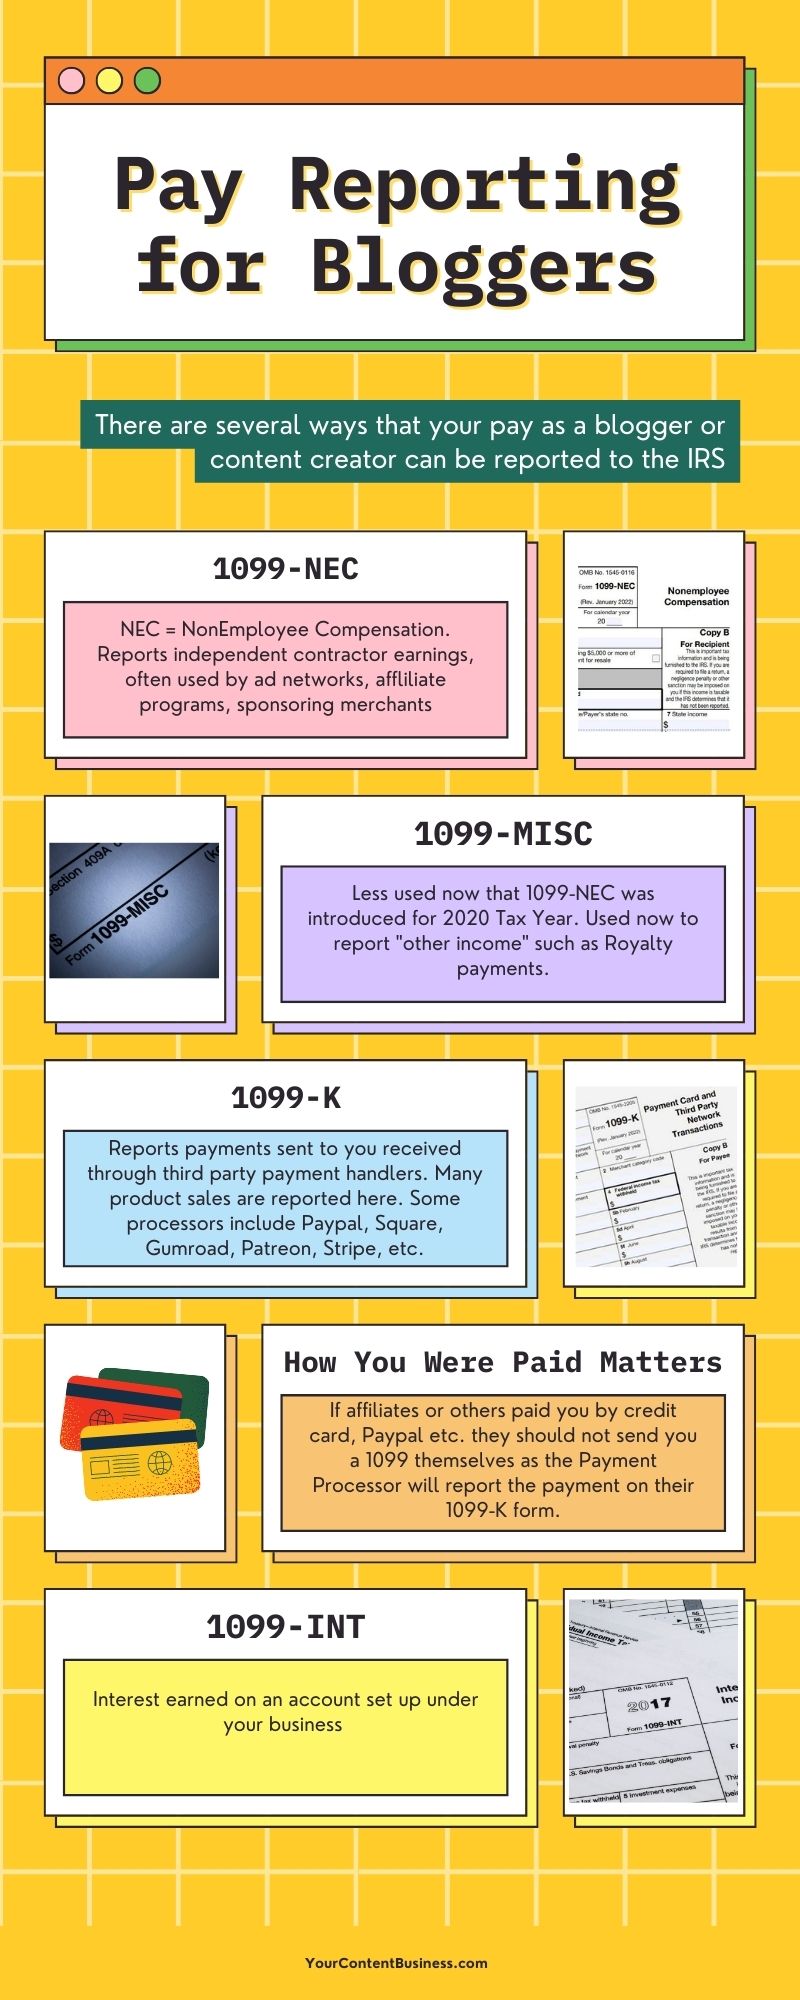 Infographic about Pay Reporting for Bloggers that discusses forms 1099-NEC for independent contractor earnings, 1099-Misc for royalty earnings, 1099-K for payment processor earnings, and 1099-INT for interest income.